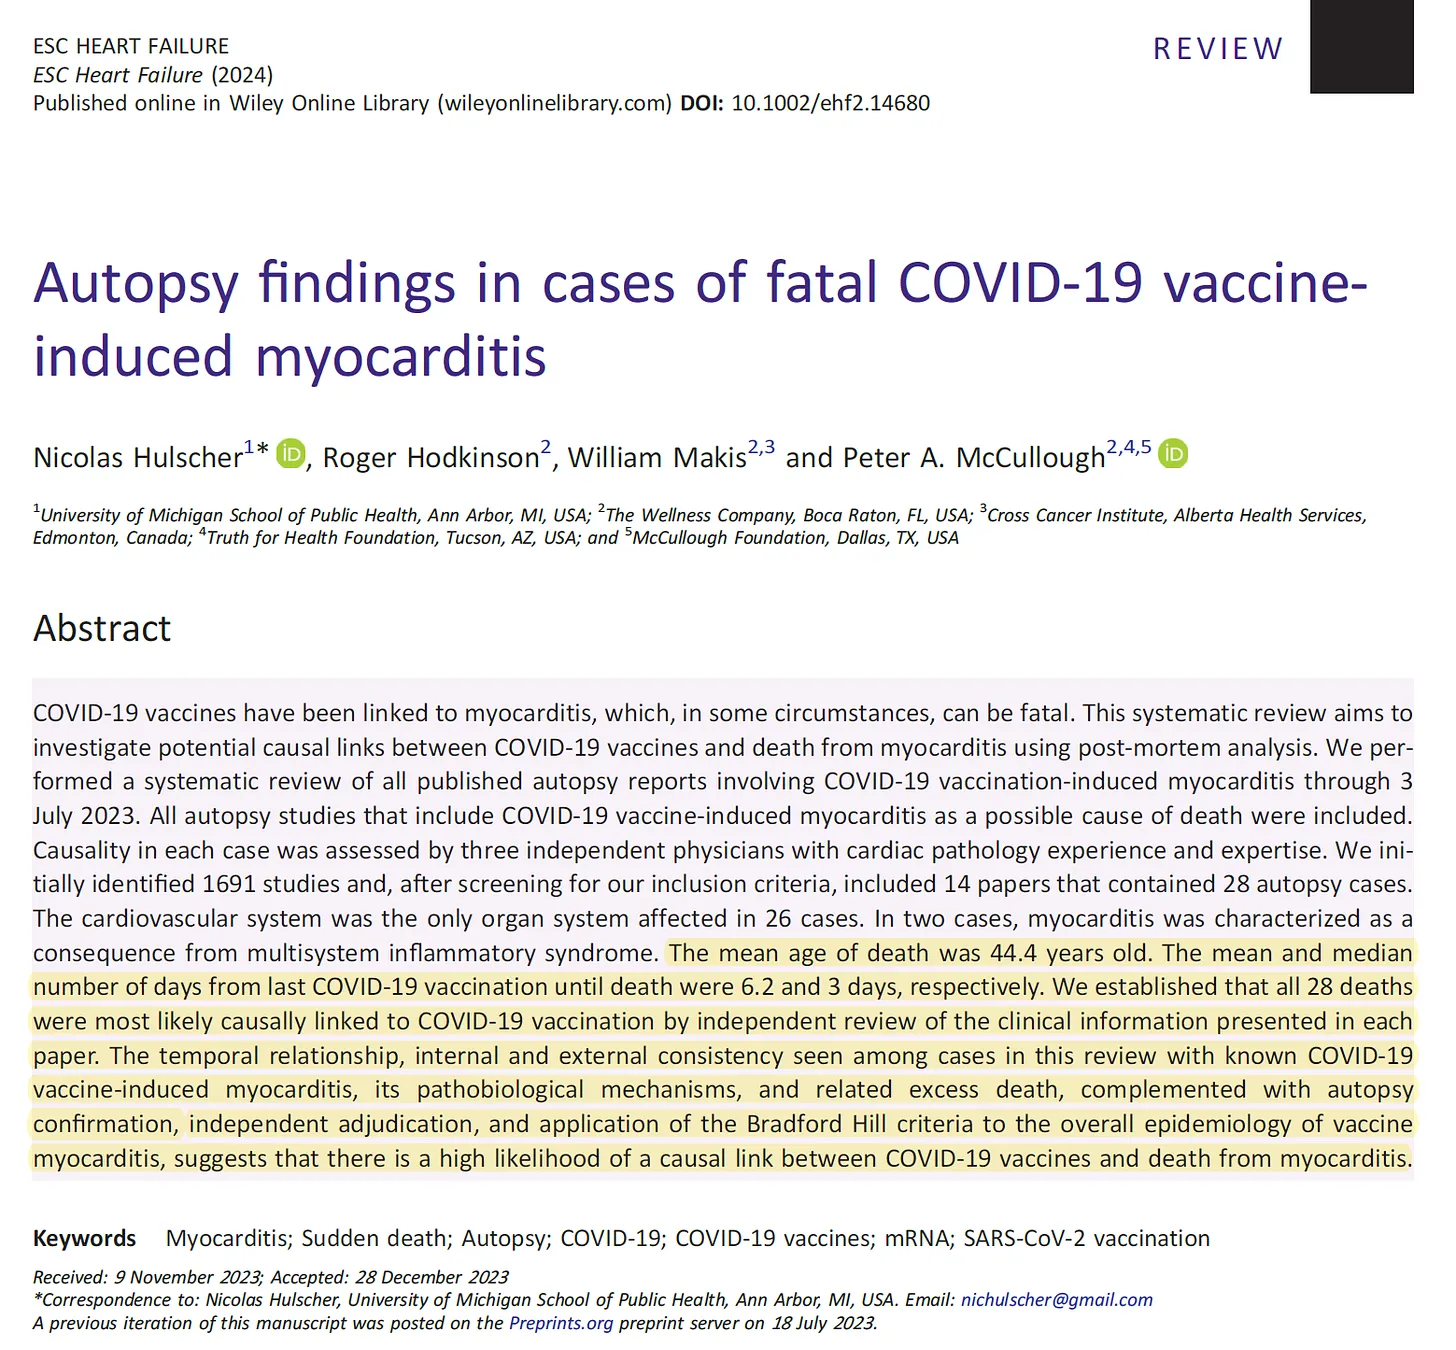 Autopsy results of fatal myocarditis caused by the COVID-19 vaccine